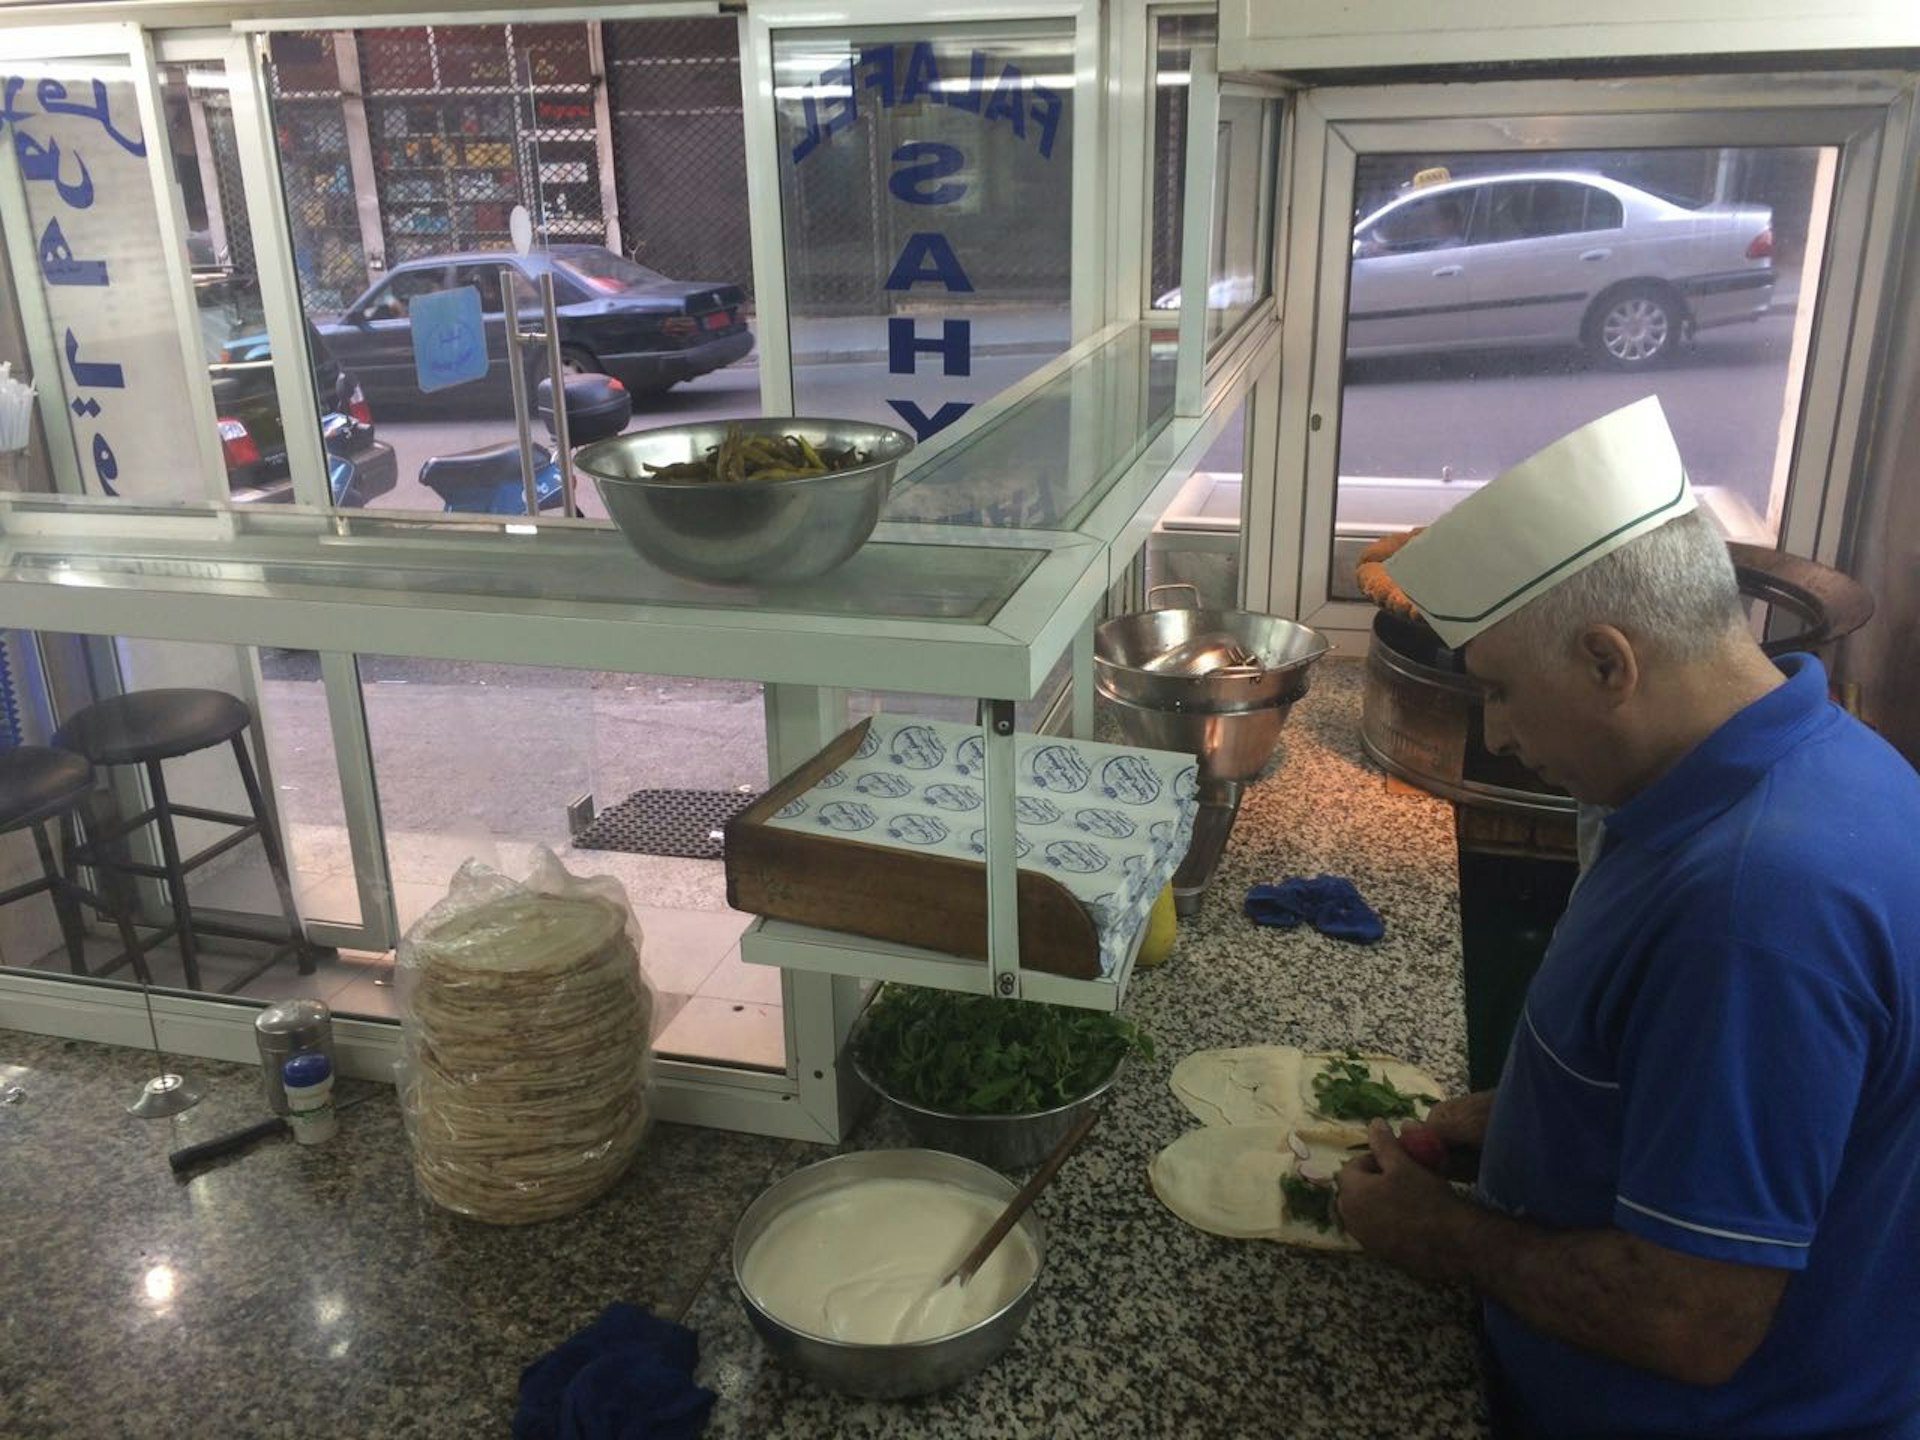 Making falafel at Sahyoun in Beirut. Image by Stephanie d'Arc Taylor / Lonely Planet